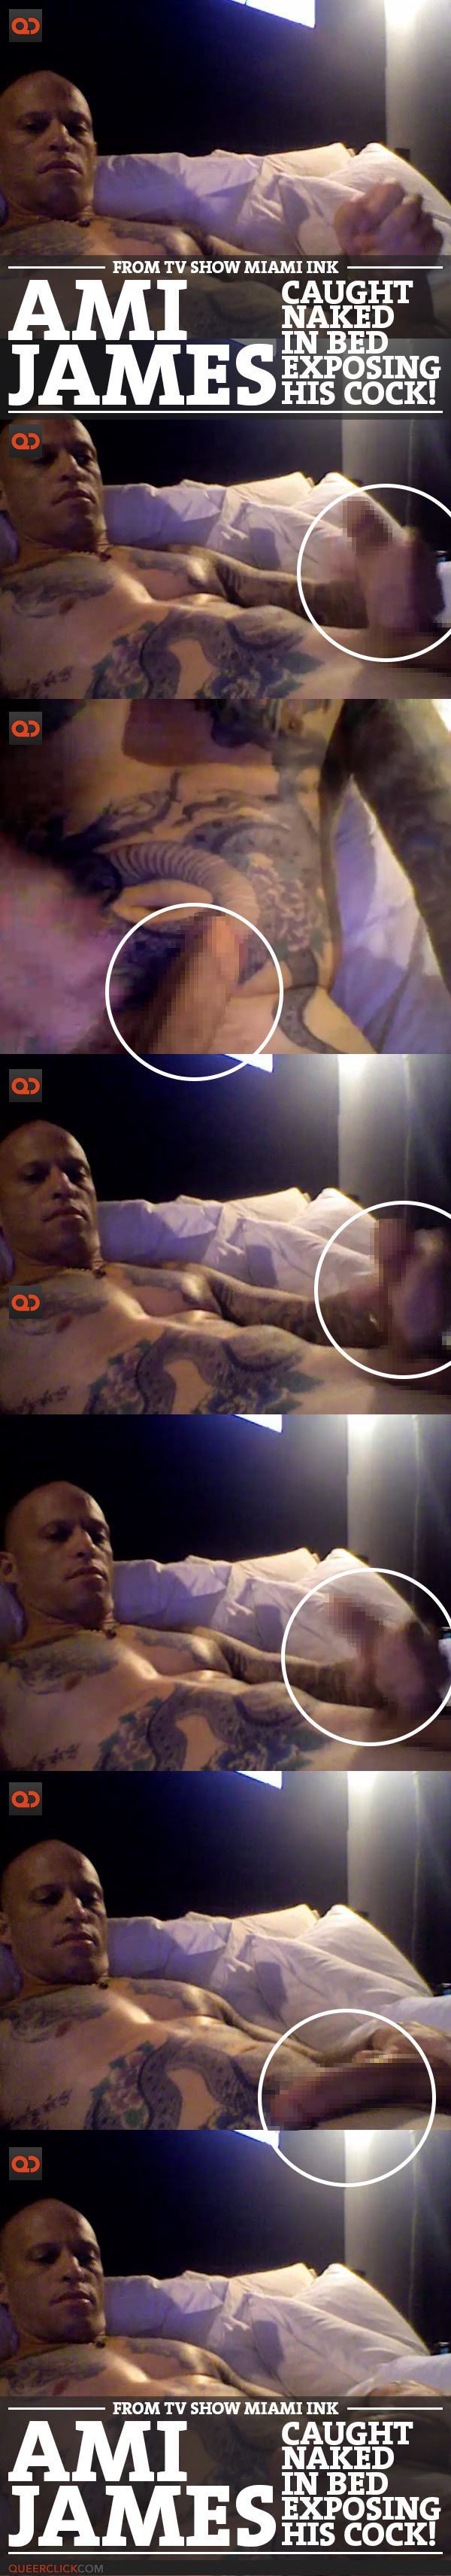 [UPDATED] Ami James, From TV Show Miami Ink, Caught Naked In Bed Exposing His Cock!